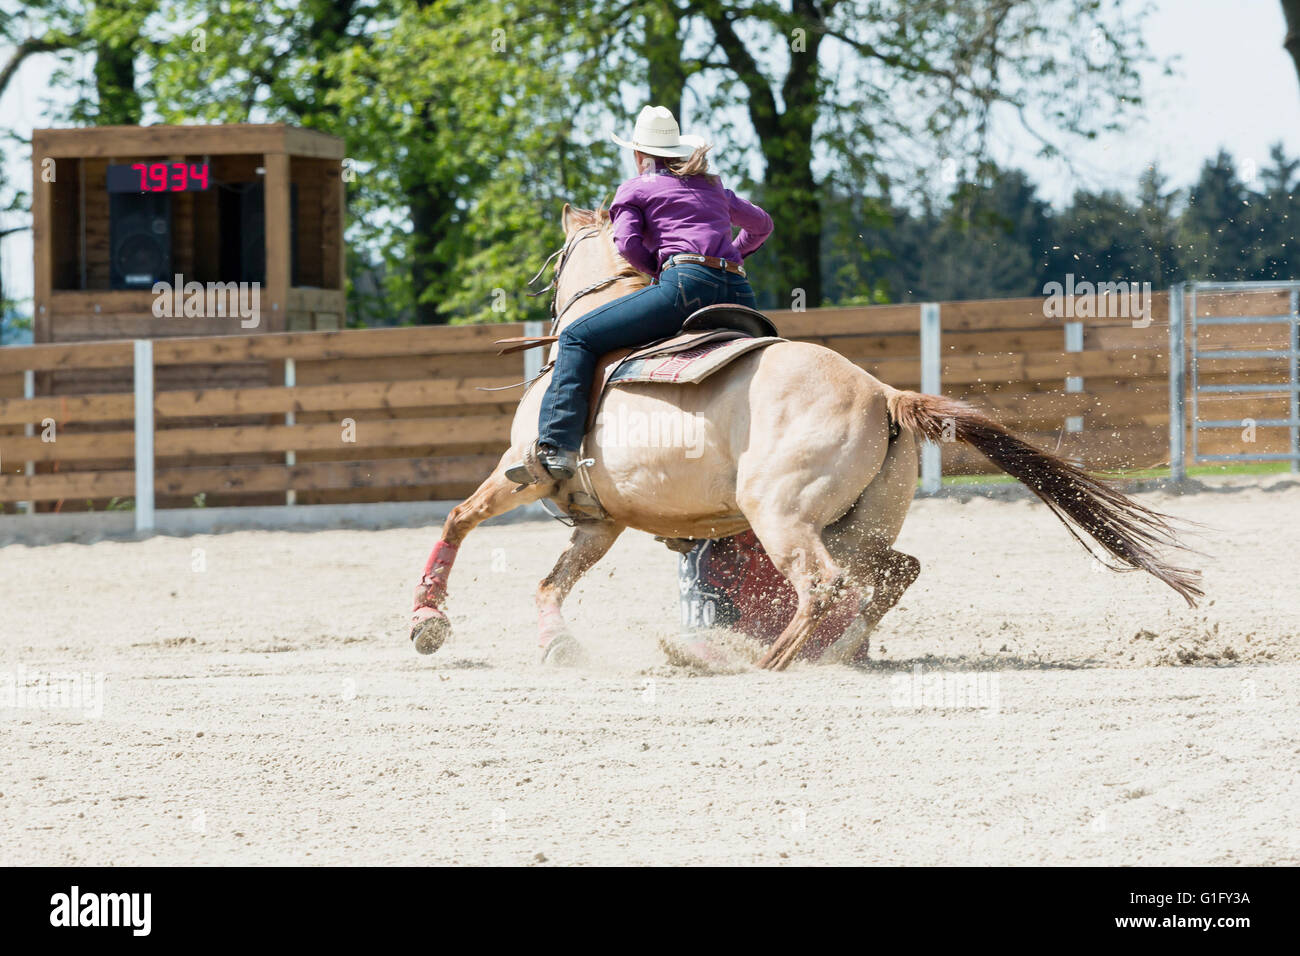 Young cowgirl with hat riding a beautiful paint horse in a barrel racing event at a rodeo in Mitrov, Czech republic Stock Photo